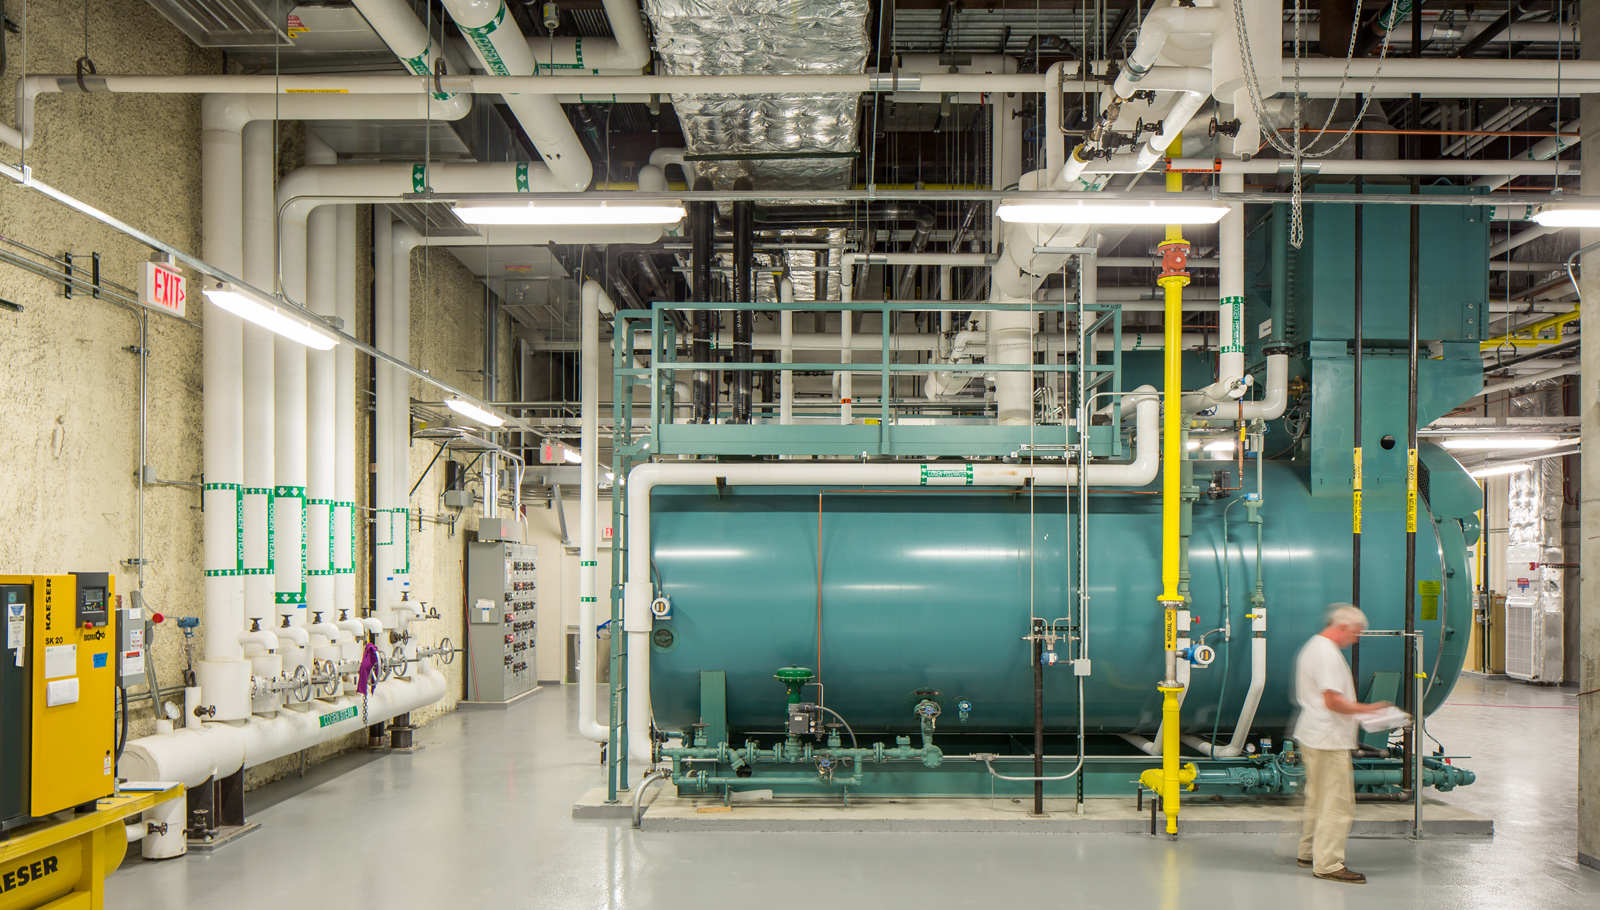 Brigham And Women's Hospital Interior, energy area with pipes, wires, and tubes